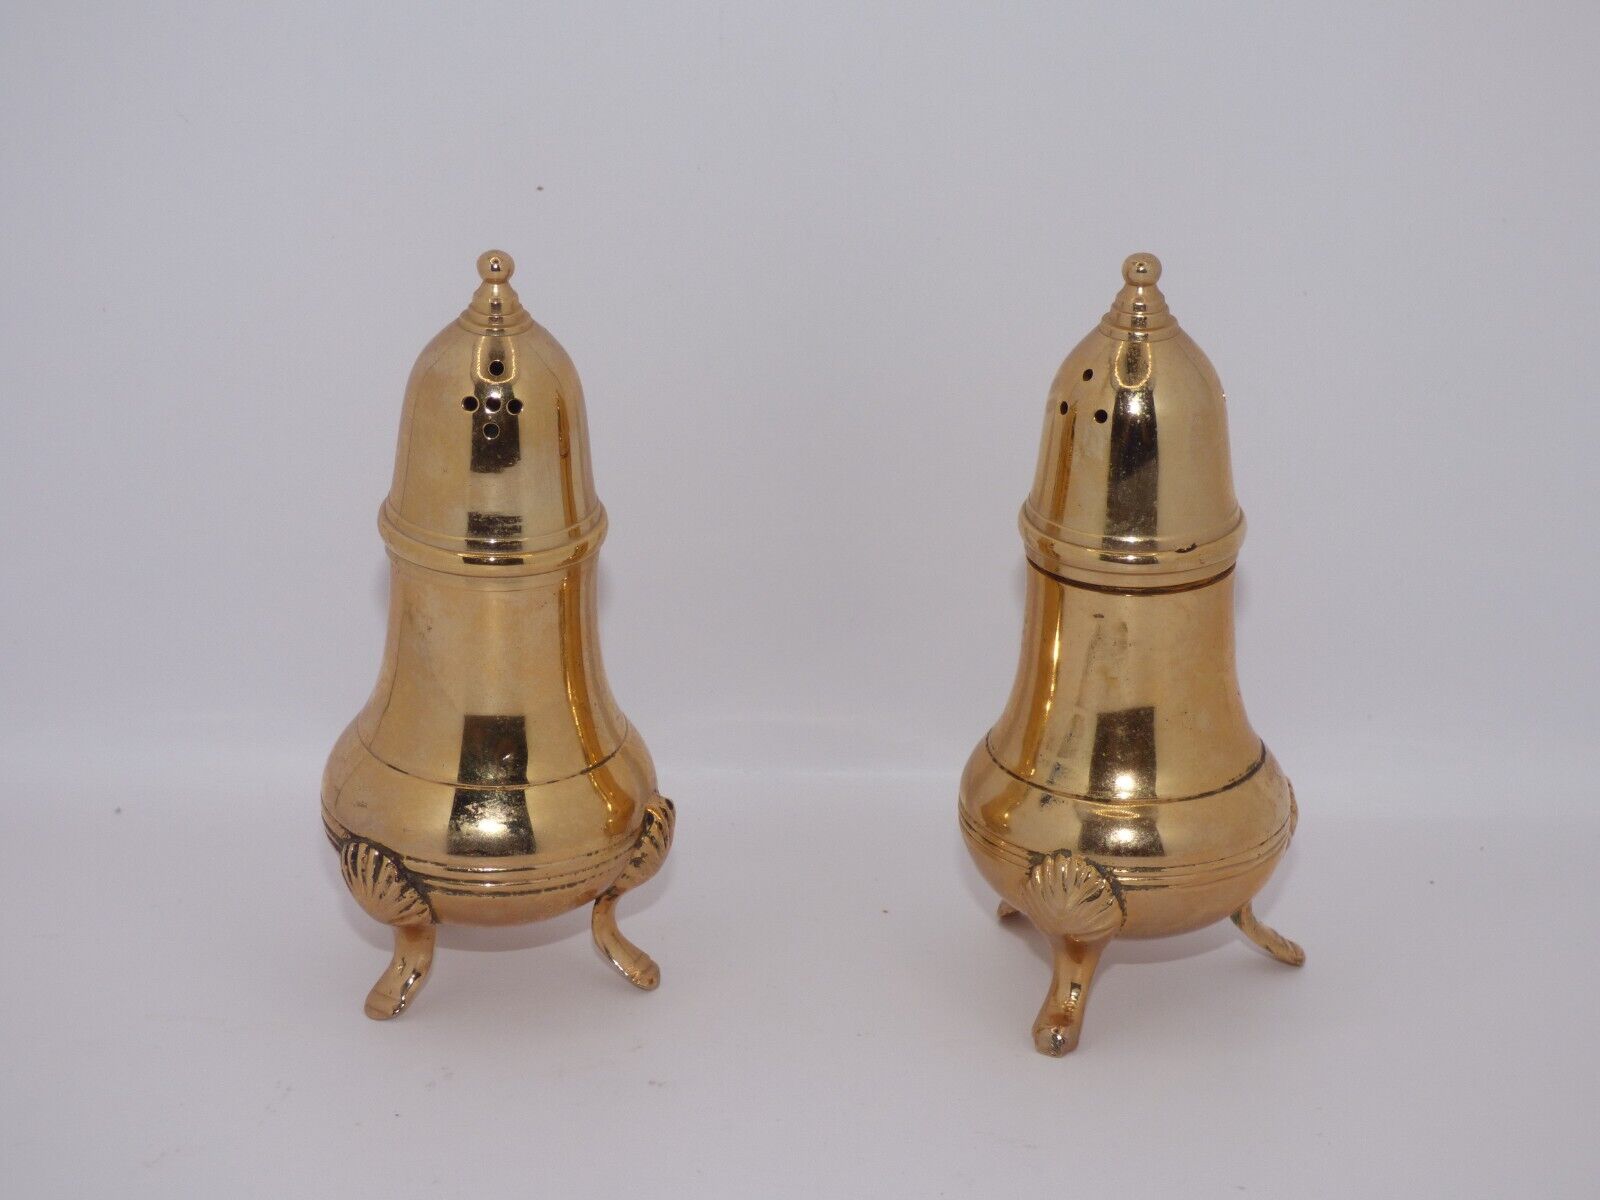 Vintage Unique Gold Color Salt And Pepper Shakers 4'' Tall